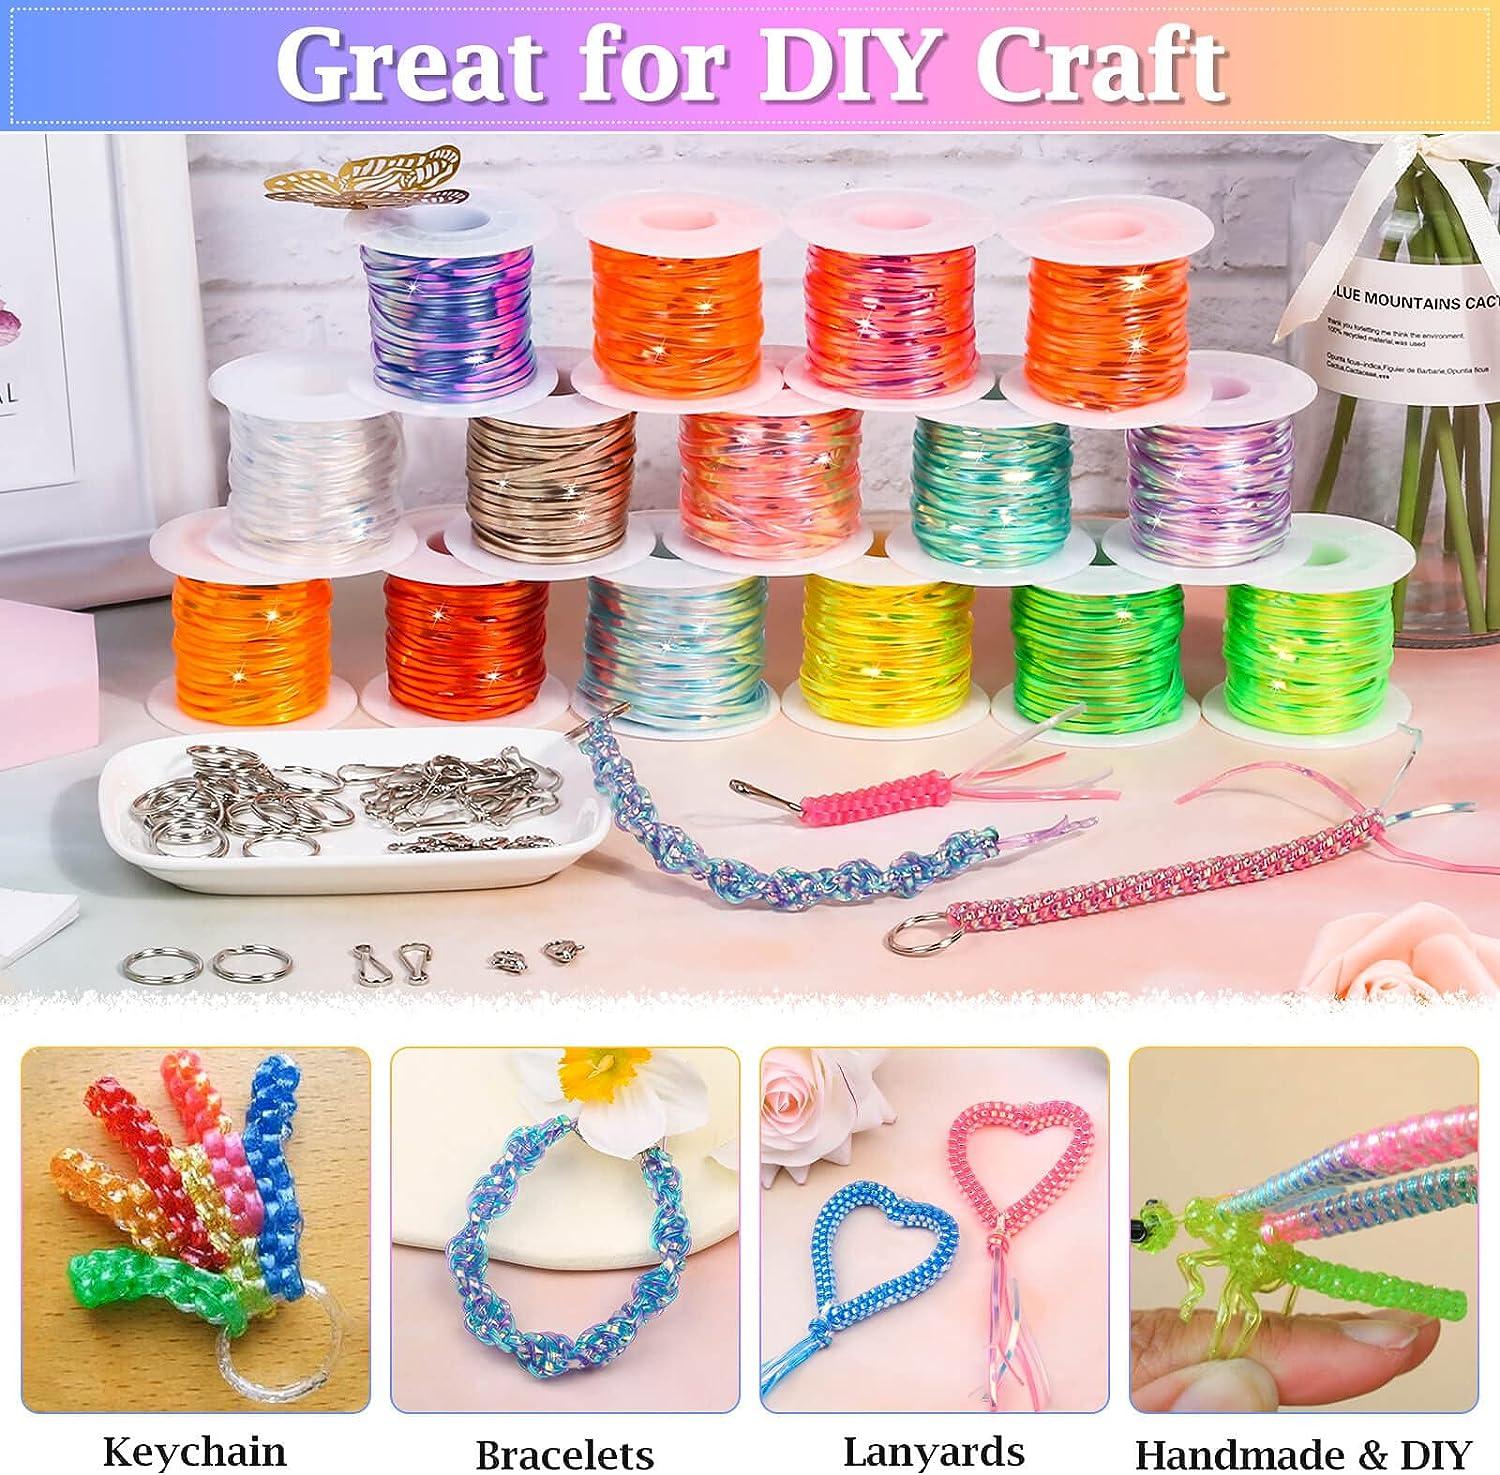 cridoz Lanyard String Kit, Boondoggle String with 25 Rolls Plastic Lacing  Cord and 50Pcs Keychain Lanyard Accessories, Gimp String Lanyard Weaving  Kit